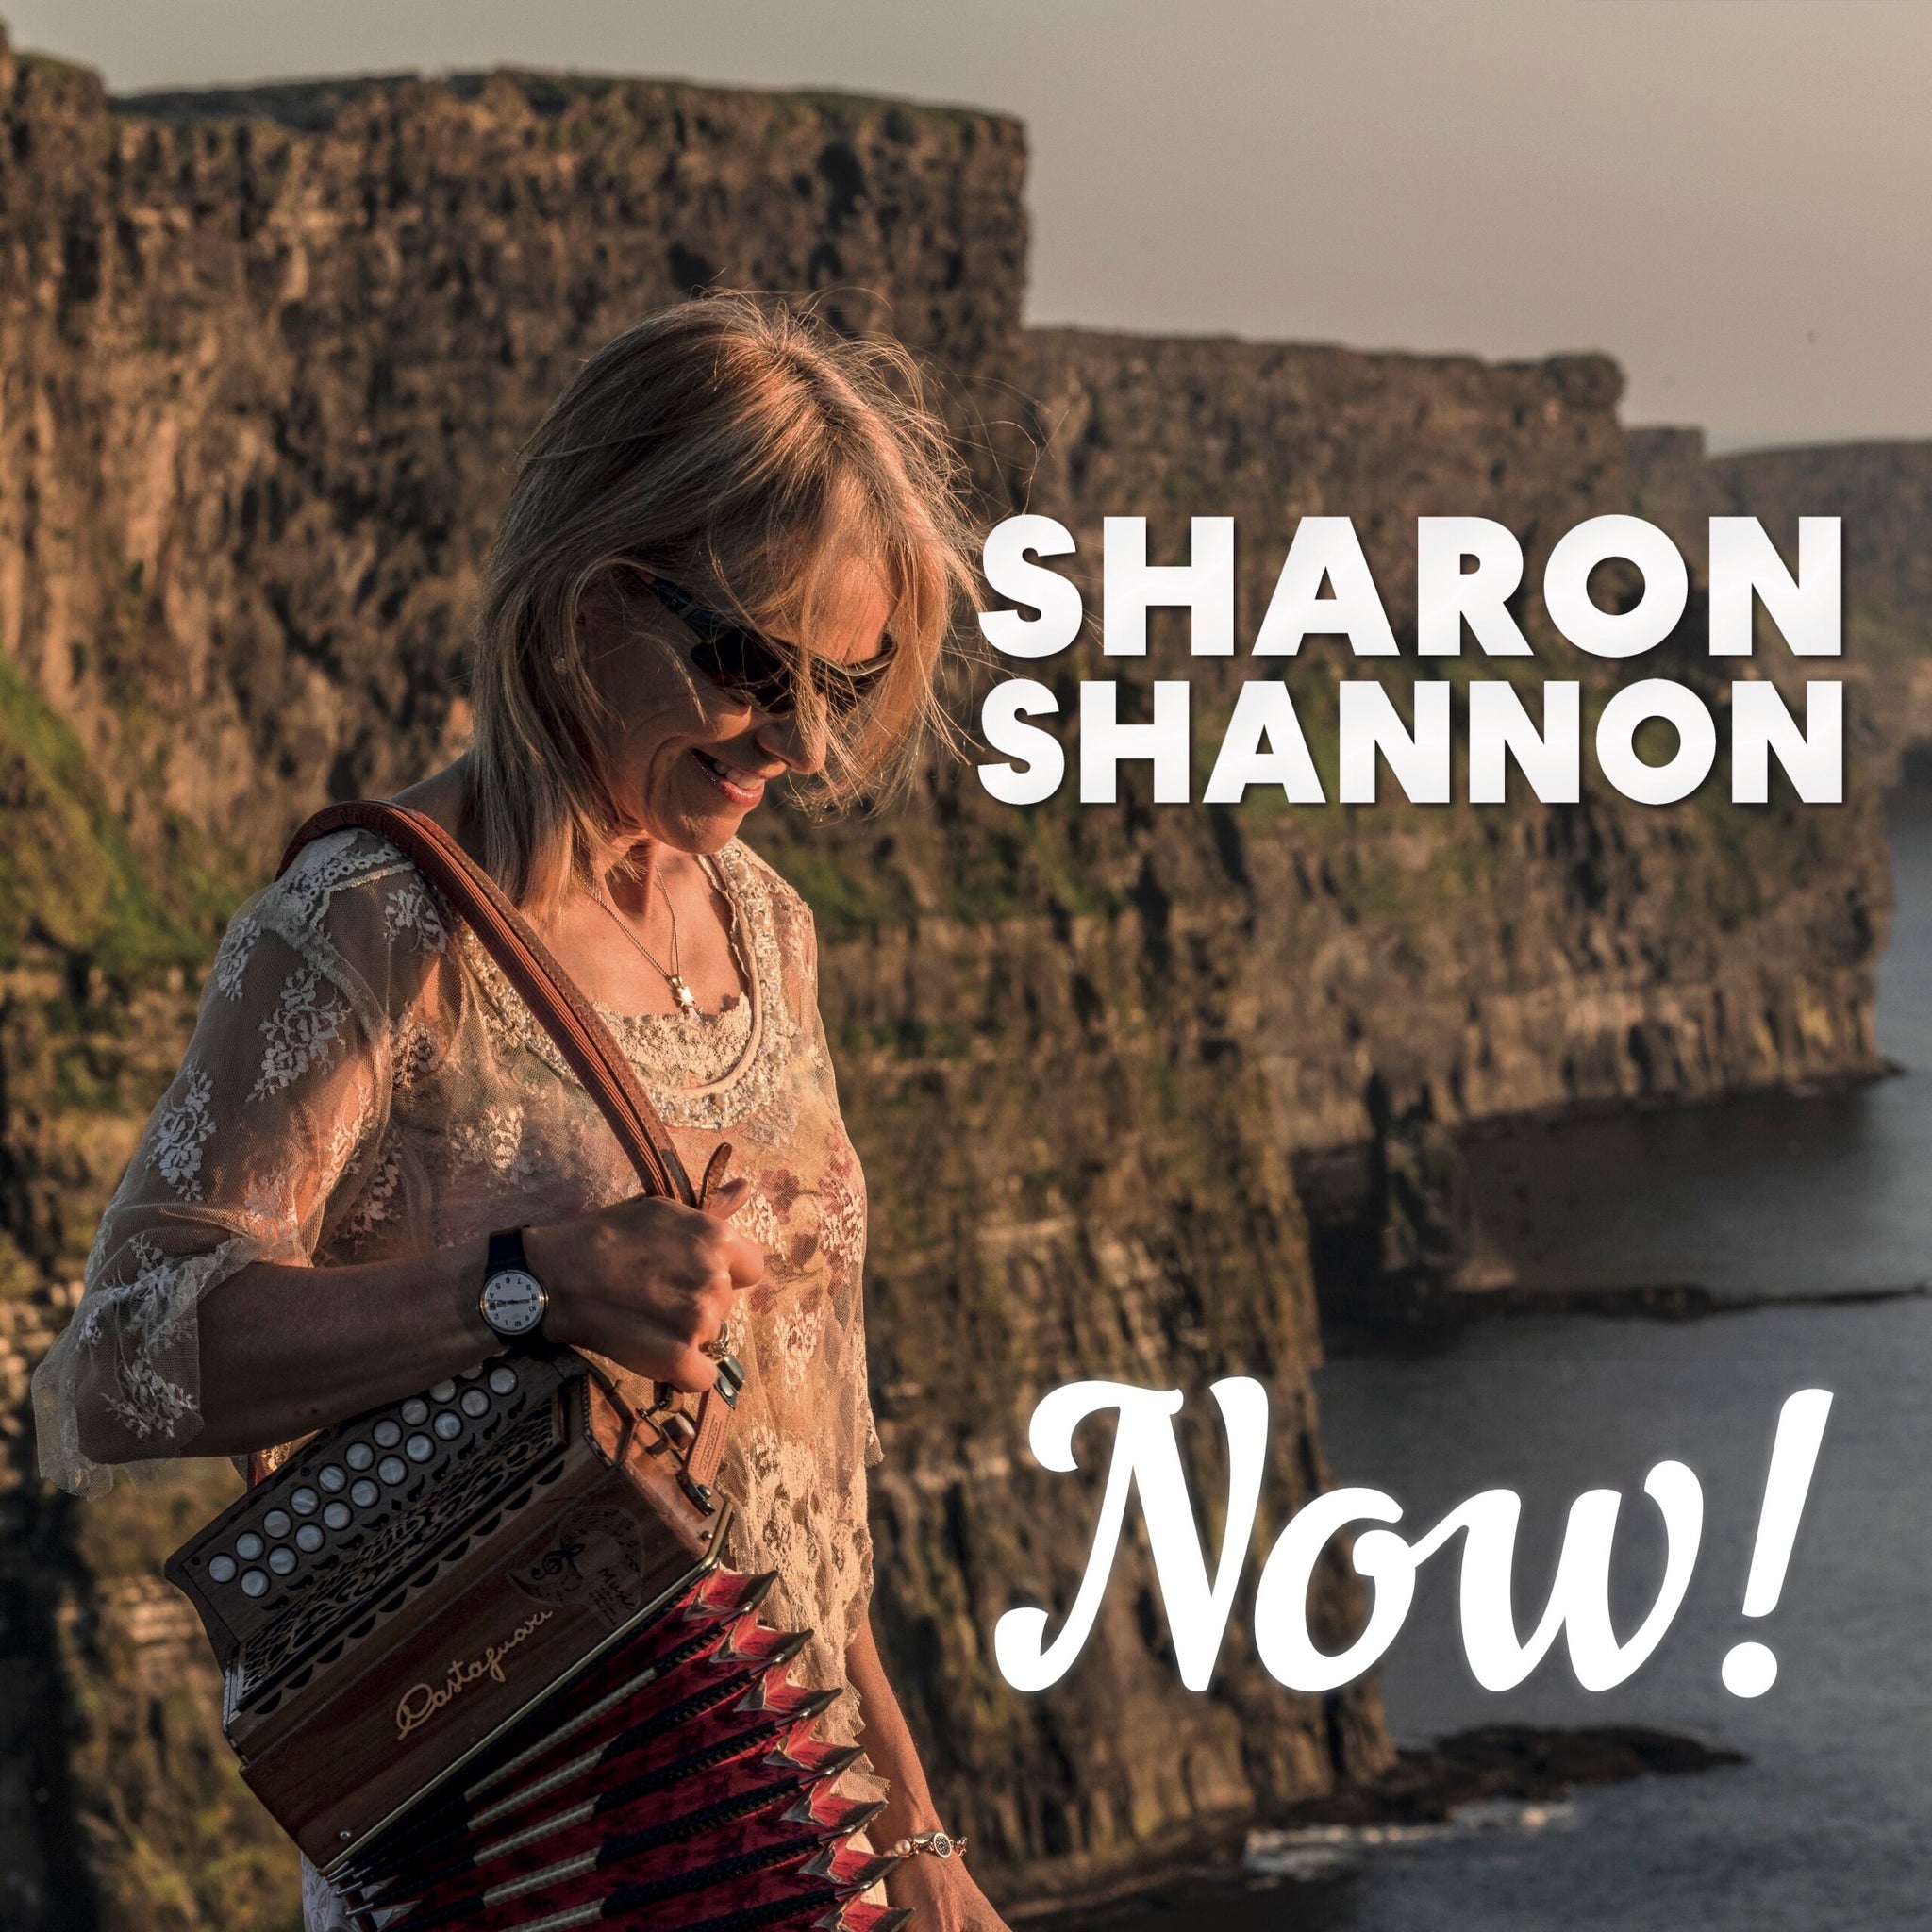 SHARON SHANNON - Now! - LP - Translucent Red Vinyl [MAY 3]